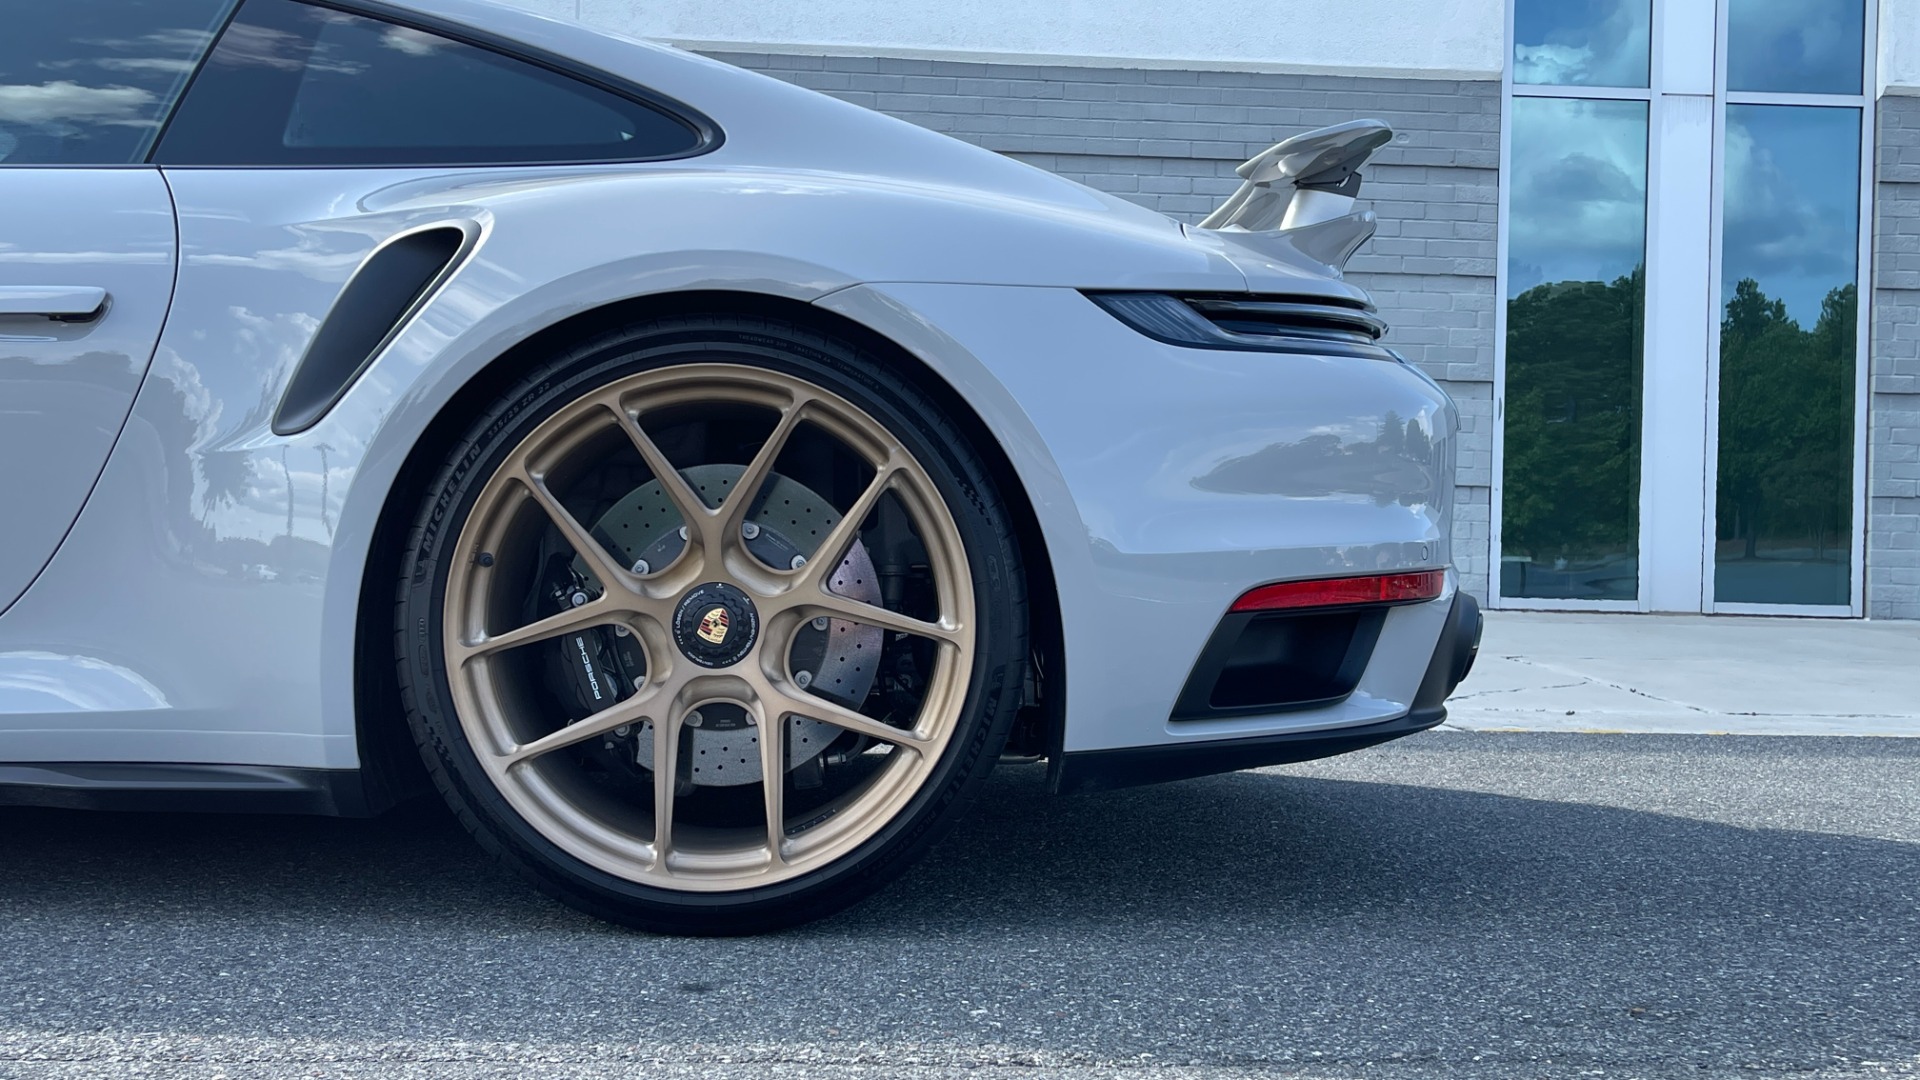 Used 2021 Porsche 911 Turbo S / HRE WHEELS / FRONT LIFT / MATRIX LIGHTS / PASM SUSPENSION for sale $279,000 at Formula Imports in Charlotte NC 28227 67